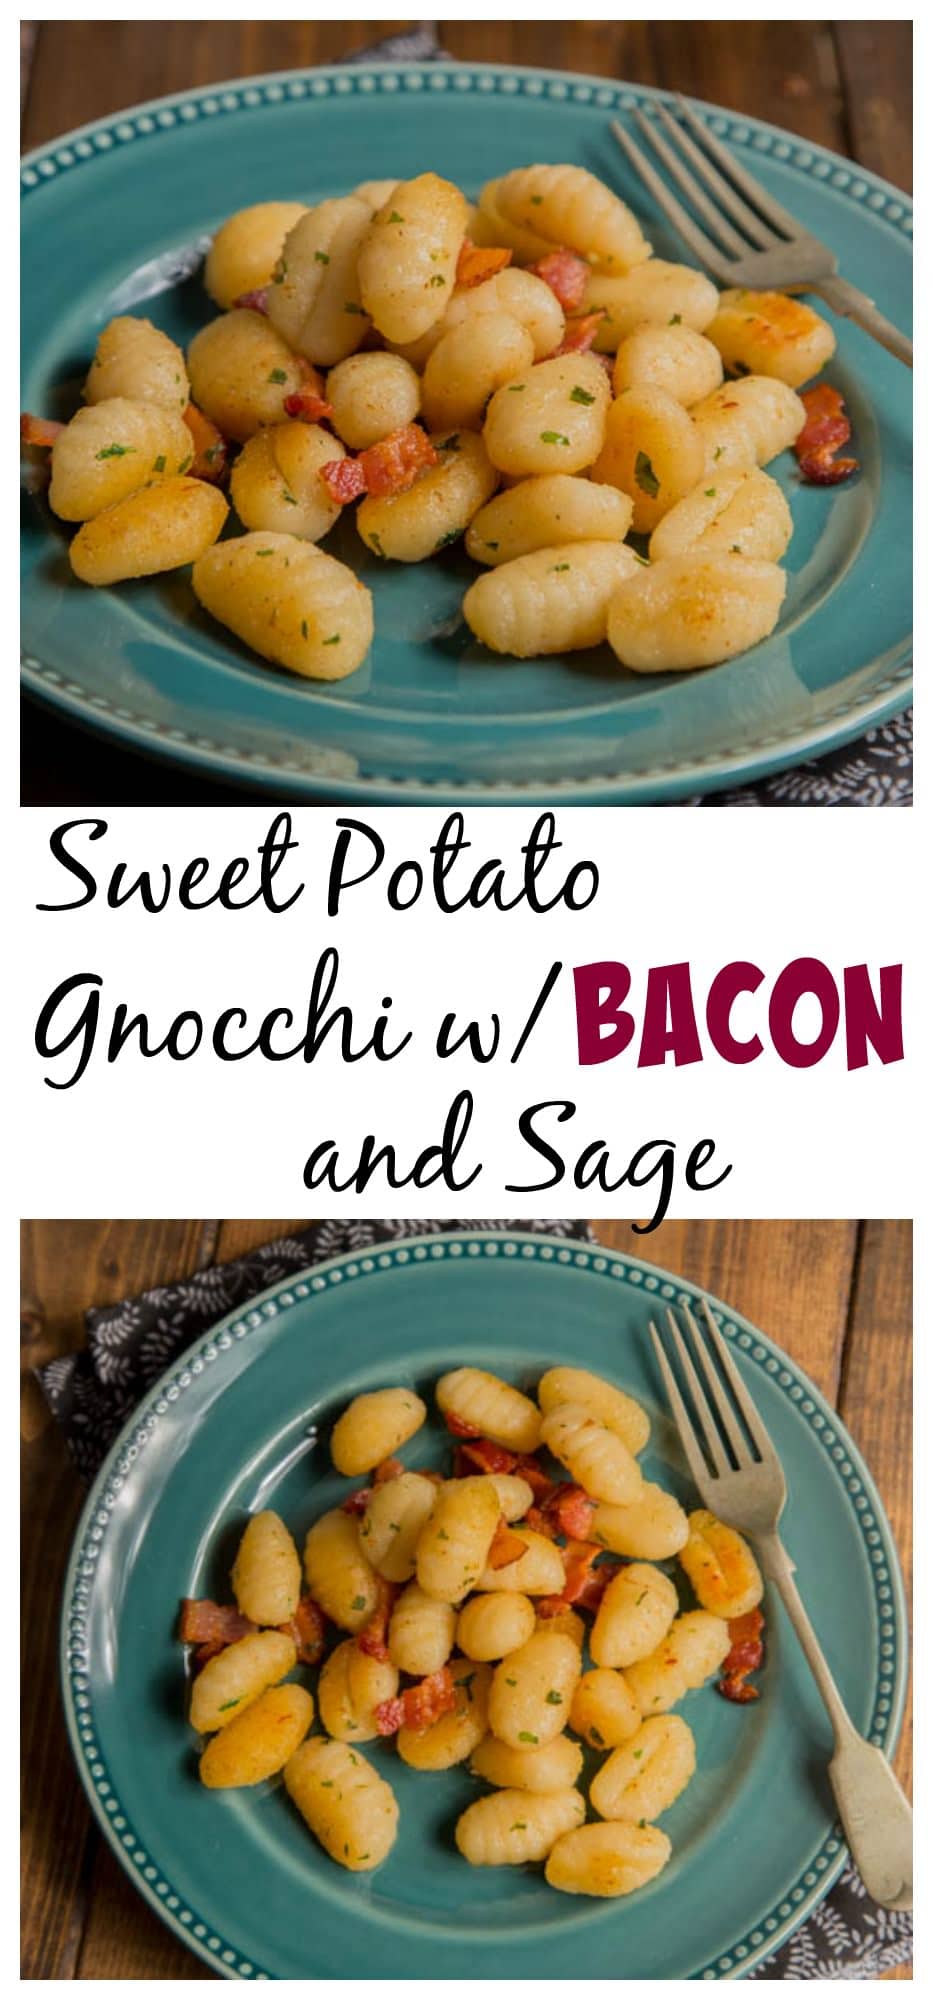 Sweet Potato Gnocchi with Bacon and Sage - Dinner is ready in just 20 minutes!  Crunchy smokey bacon, fresh sage, and Parmesan cheese with sweet potato gnocchi make a wonderful flavor combination.